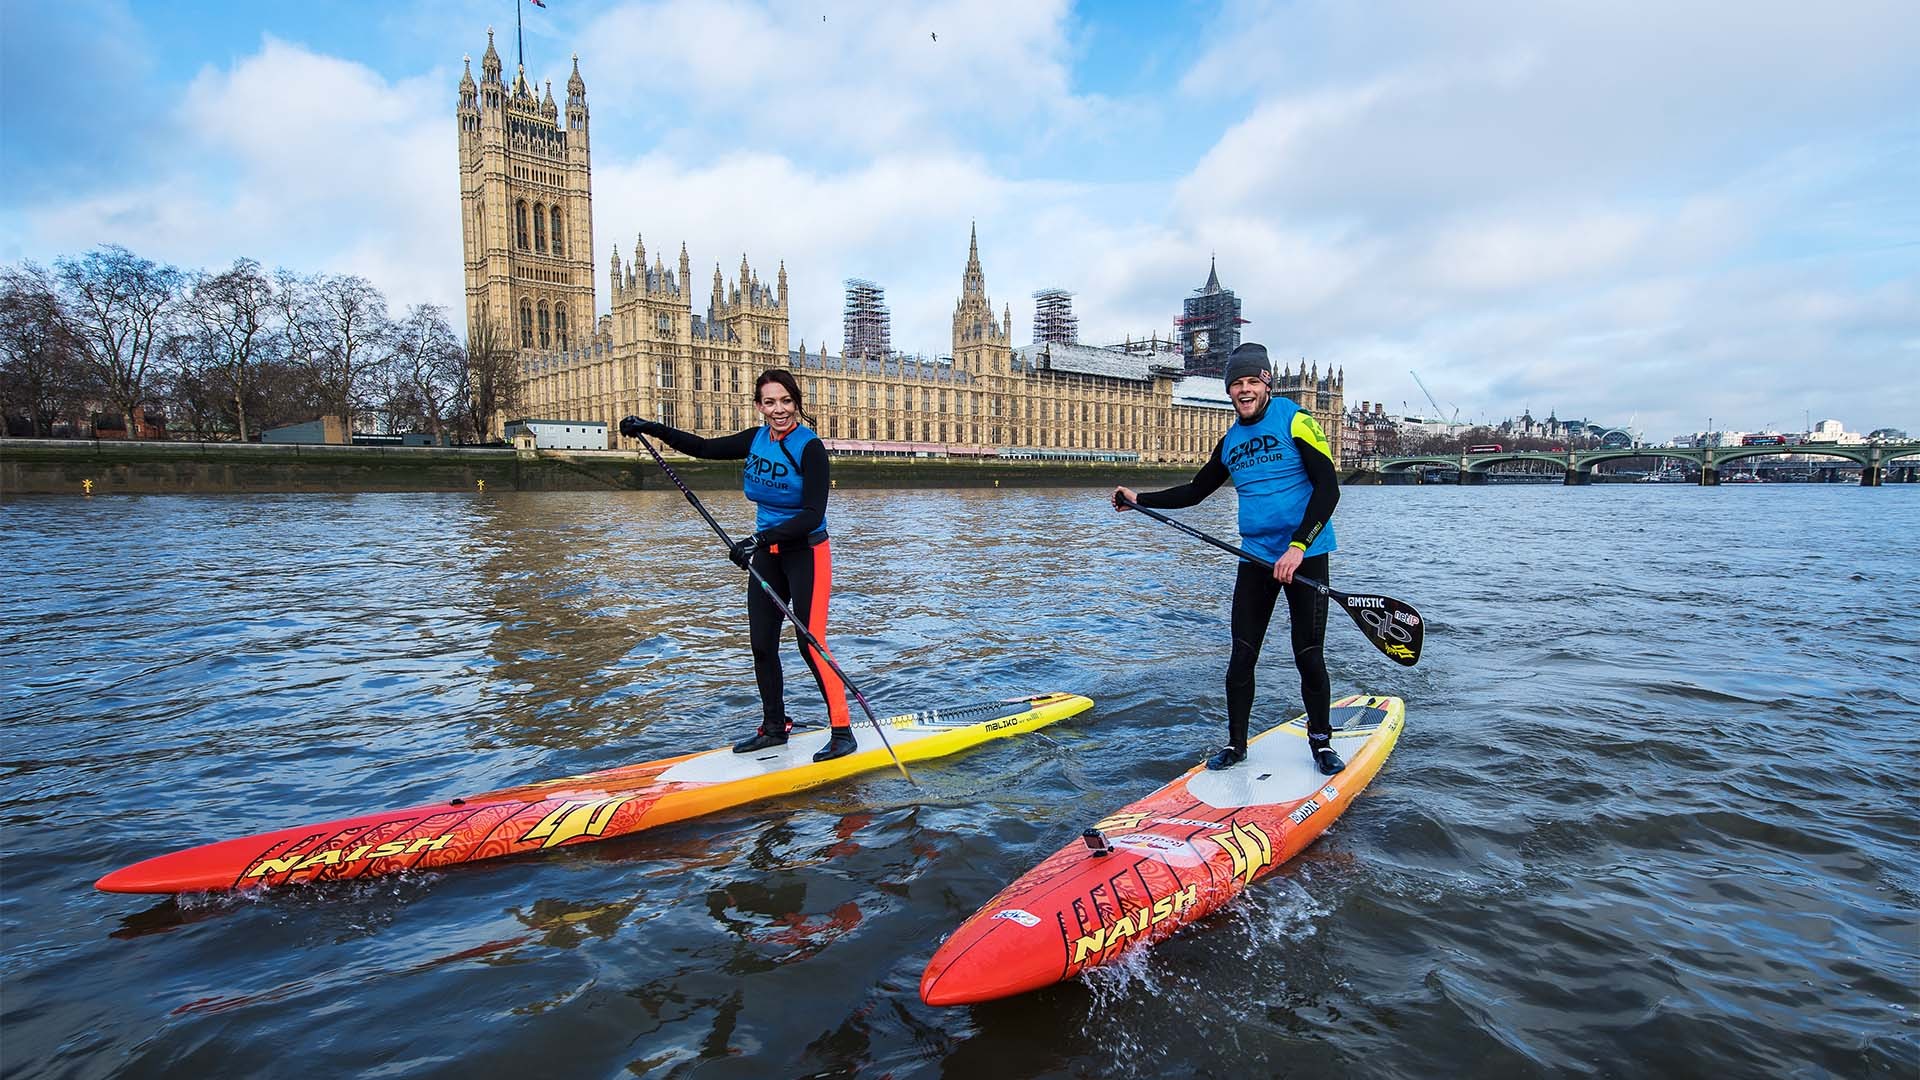 Stand-up paddle boarding in London | Square Mile